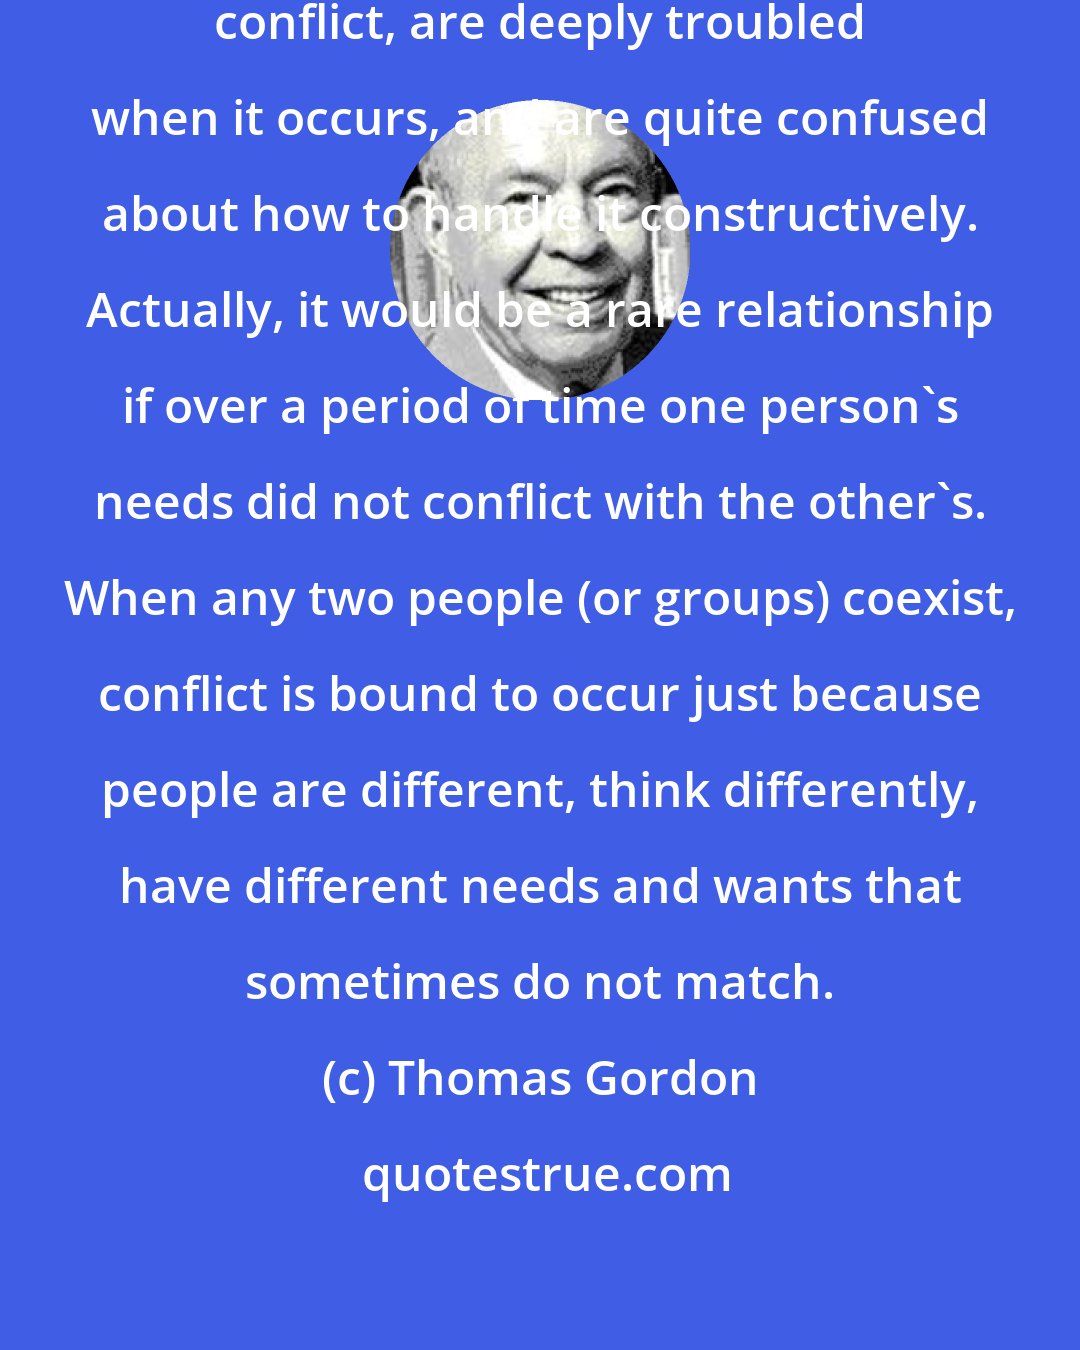 Thomas Gordon: Most parents hate to experience conflict, are deeply troubled when it occurs, and are quite confused about how to handle it constructively. Actually, it would be a rare relationship if over a period of time one person's needs did not conflict with the other's. When any two people (or groups) coexist, conflict is bound to occur just because people are different, think differently, have different needs and wants that sometimes do not match.